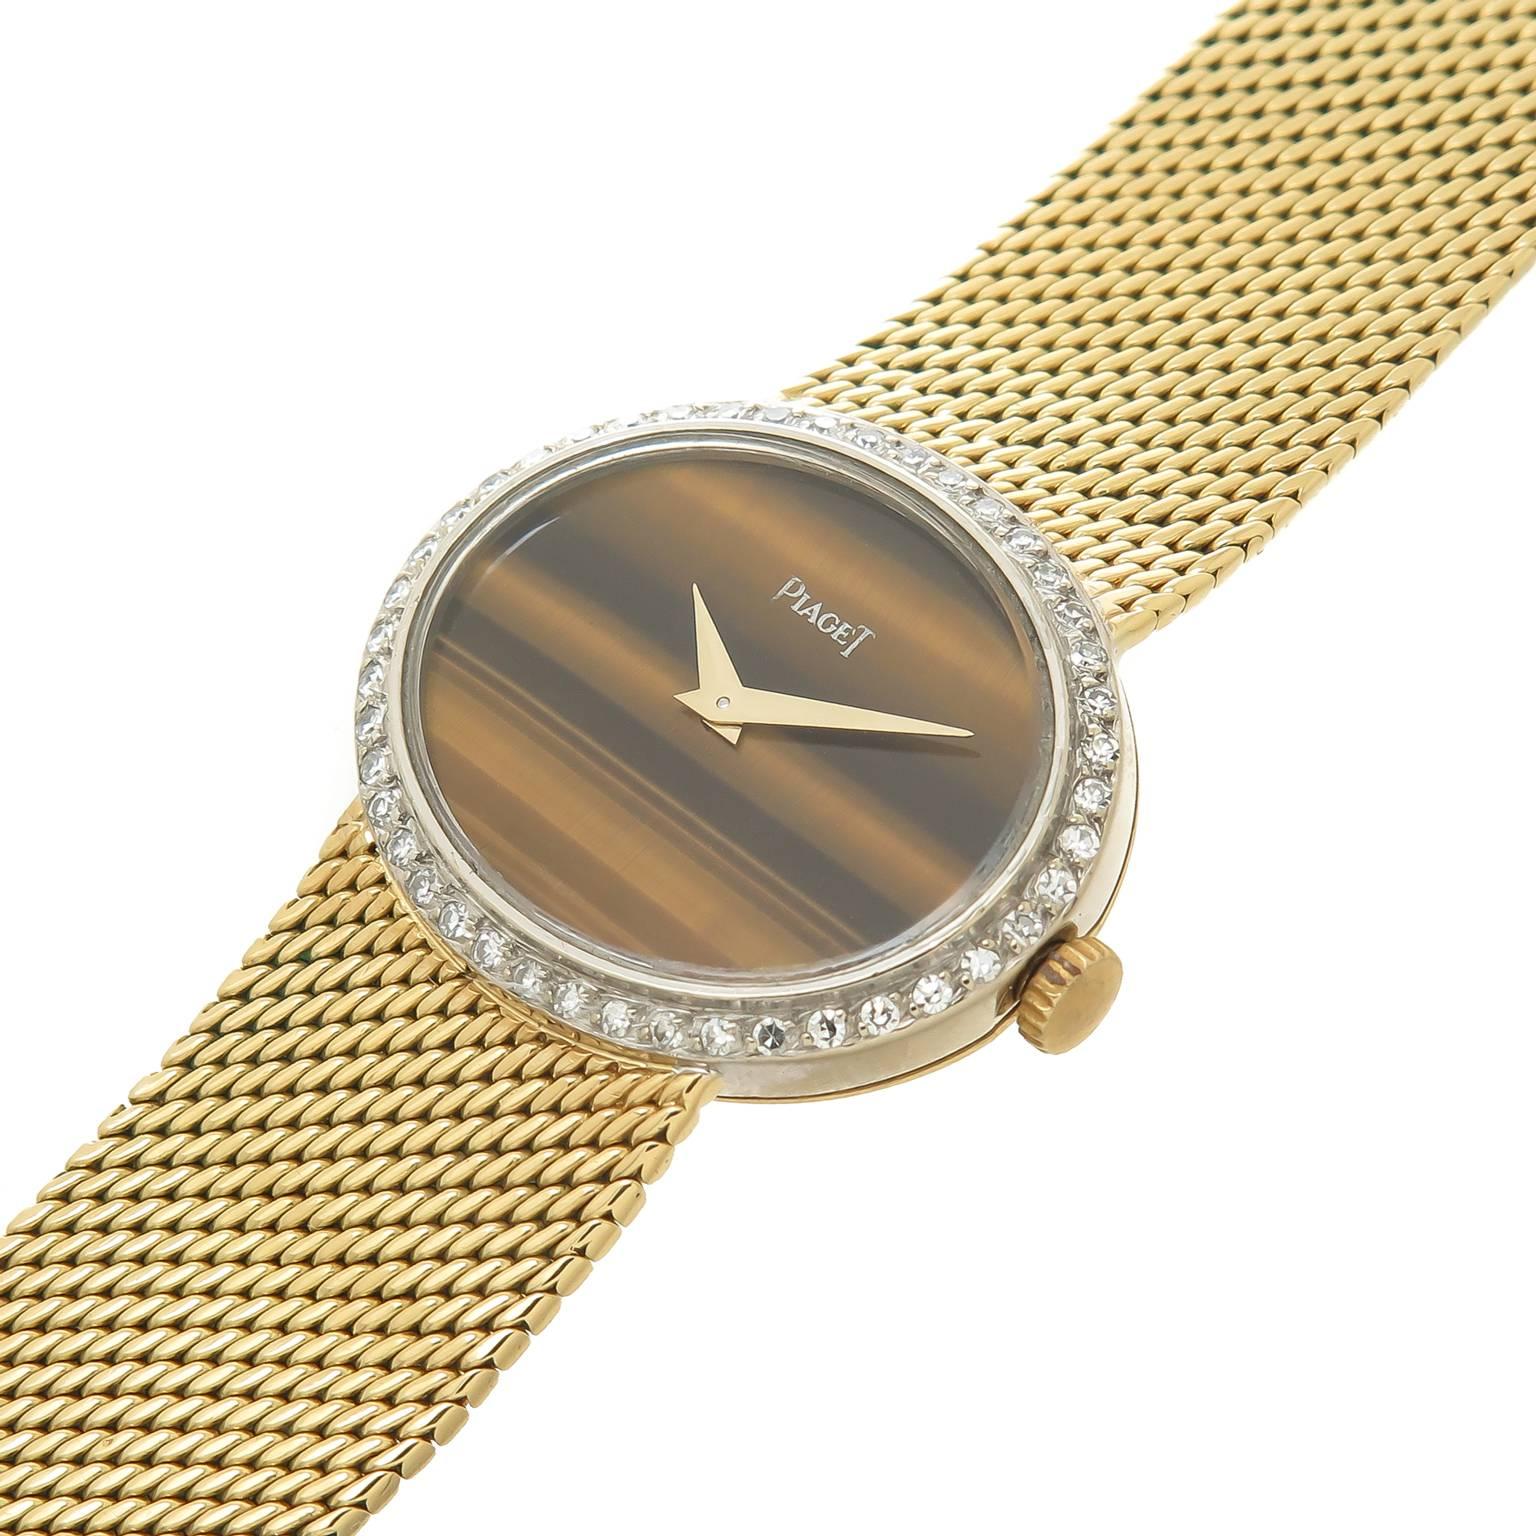 Circa 1980 Piaget Ladies Wrist Watch,  25 X 21 MM Water Resistant Case with Factory Diamond Bezel of approximately 1 Carat. Manual wind Mechanical movement, Tiger Eye Dial with Gold Hands. 5/8 inch wide Soft mesh link Piaget bracelet with Piaget